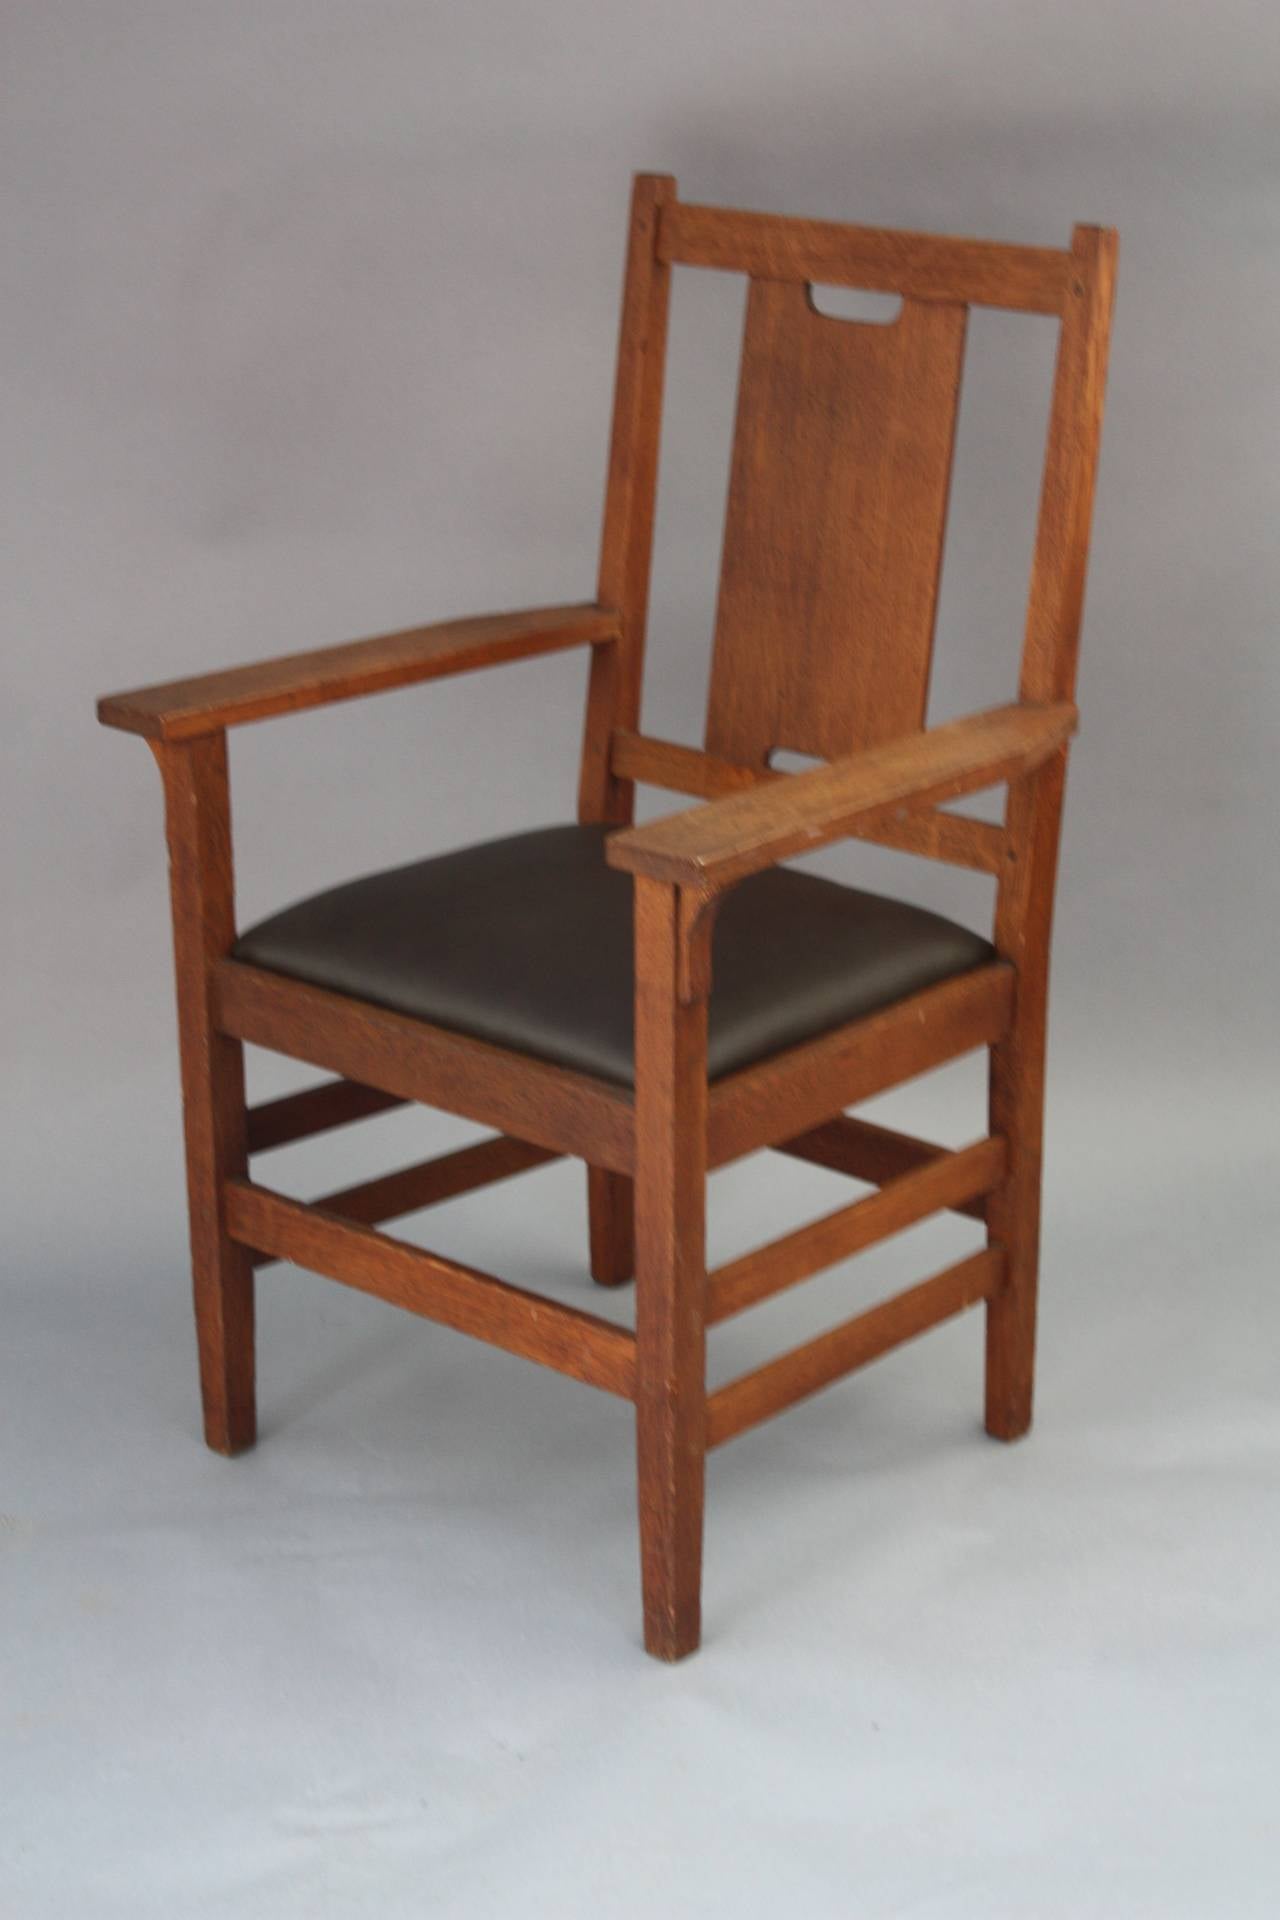 Circa 1910 armchair with new leather seat. Chair is not signed. Pegged. 39.5